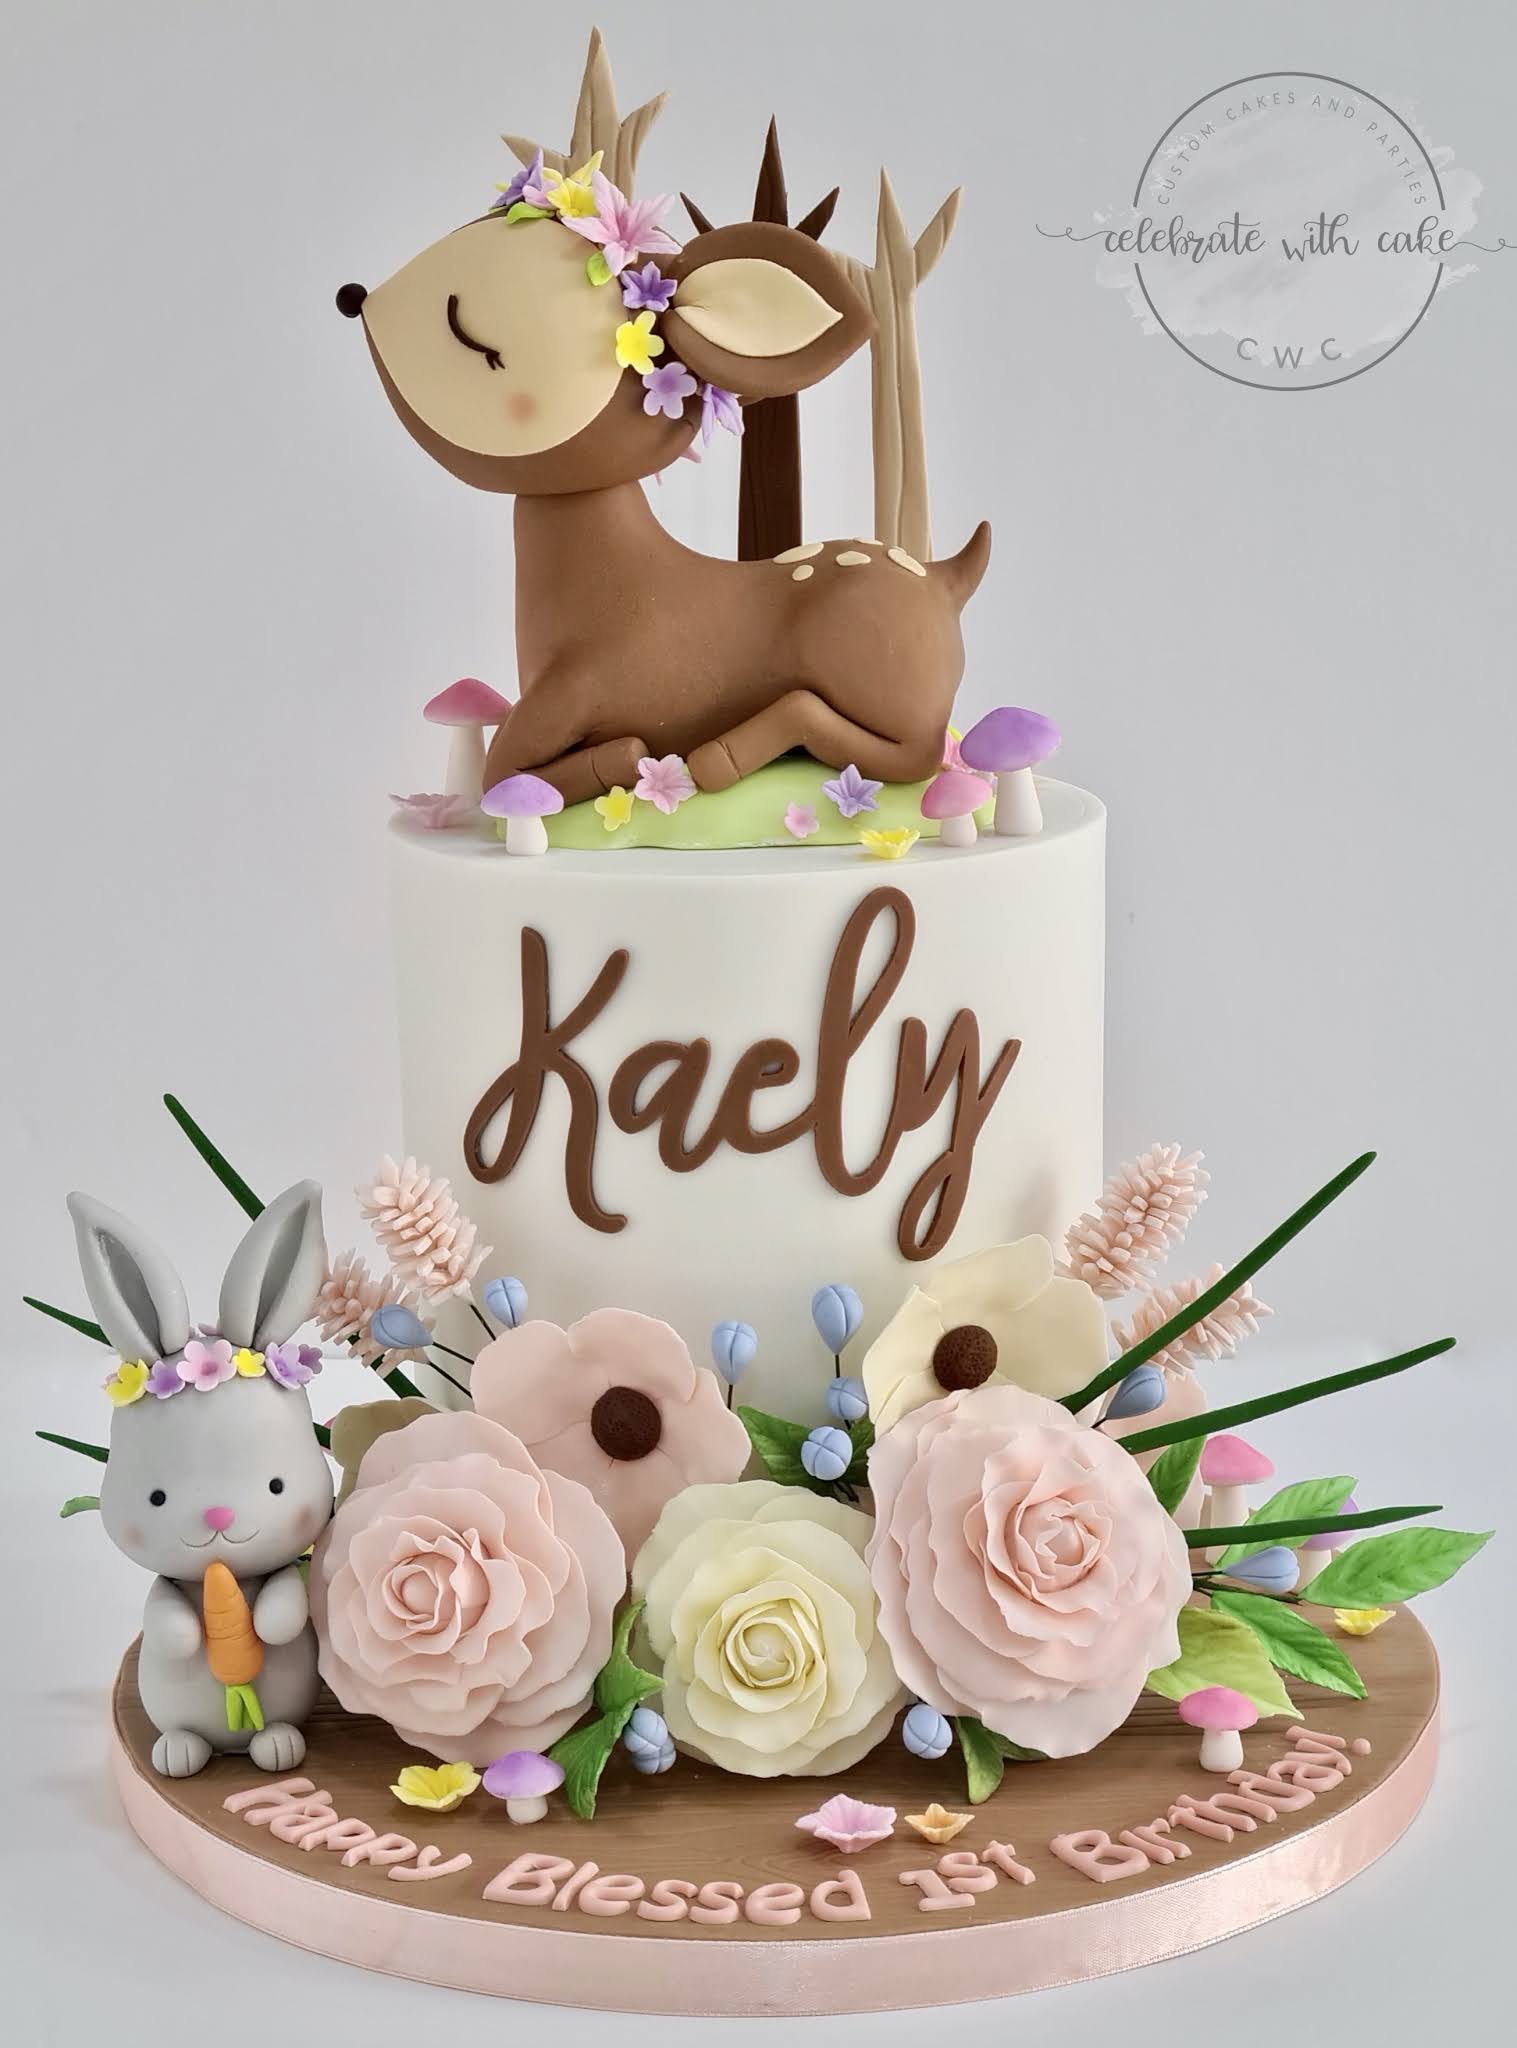 Celebrate with Cake!: Woodland featuring Deer 1st birthday single tier Cake